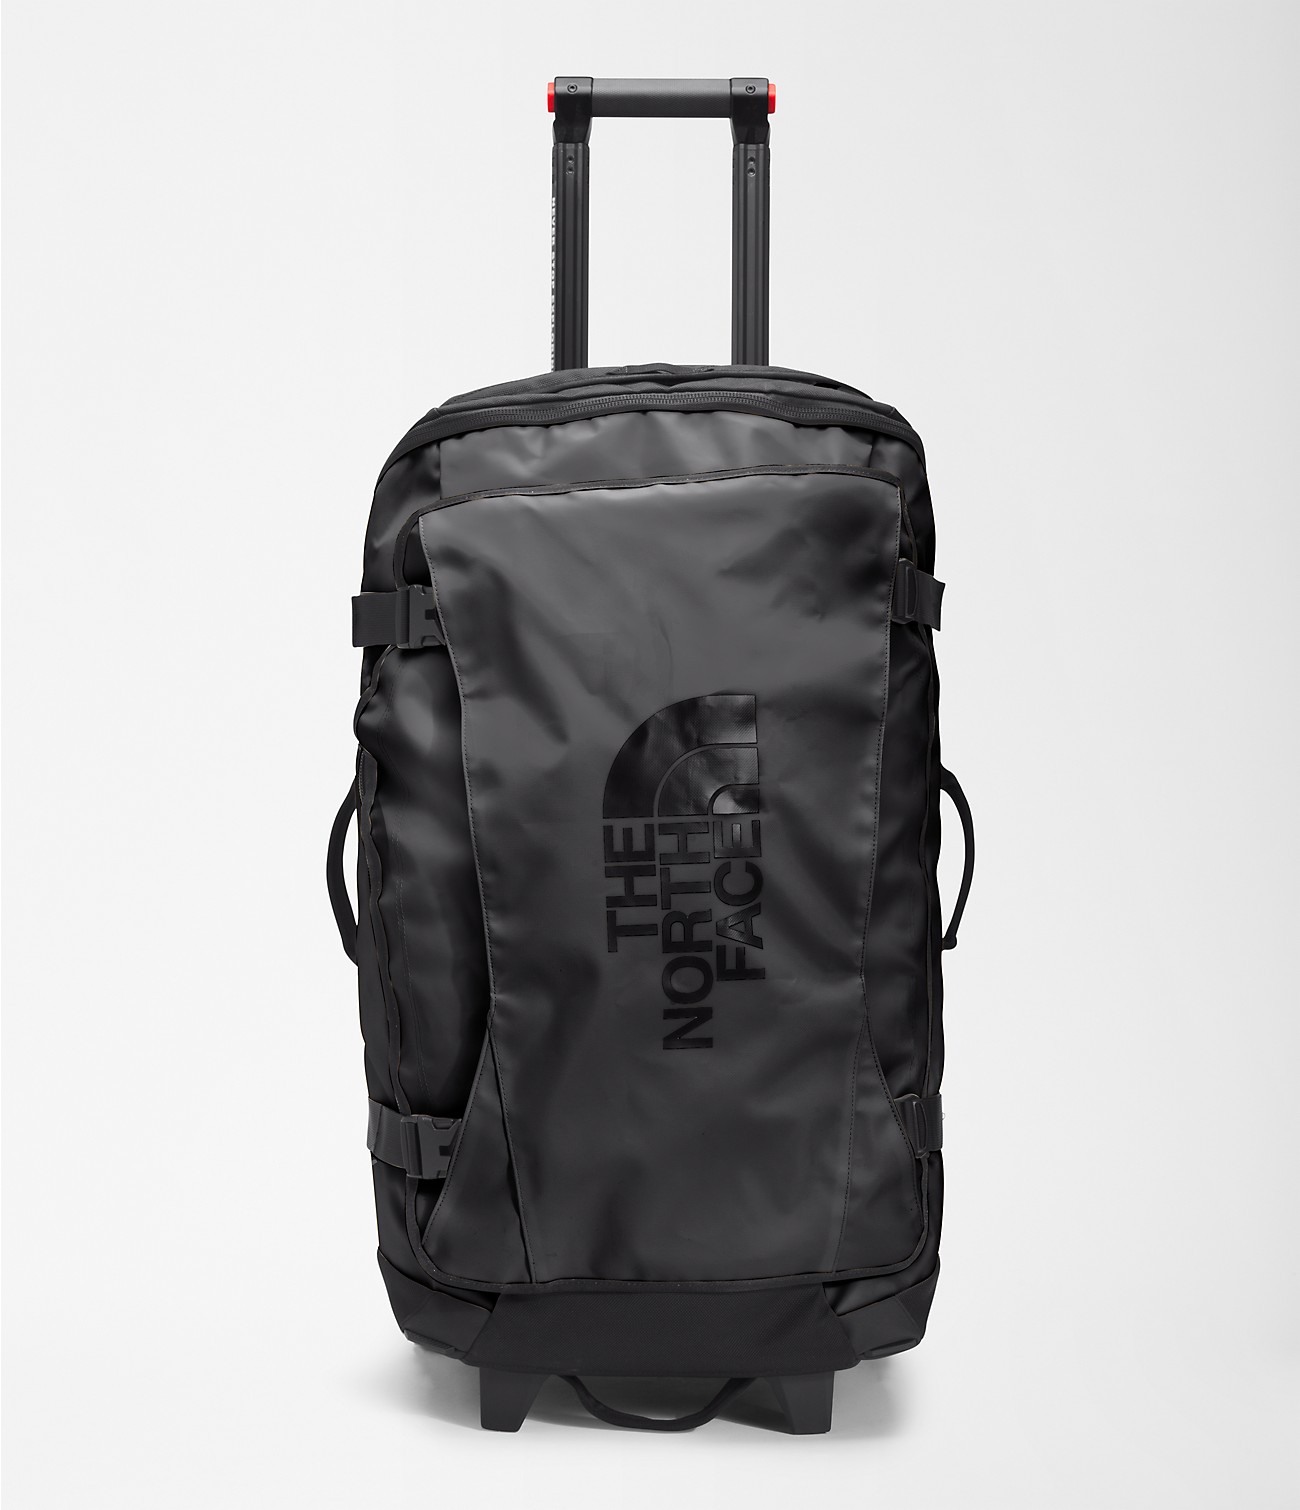 Unlock Wilderness' choice in the Eastpak Vs North Face comparison, the Rolling Thunder by The North Face